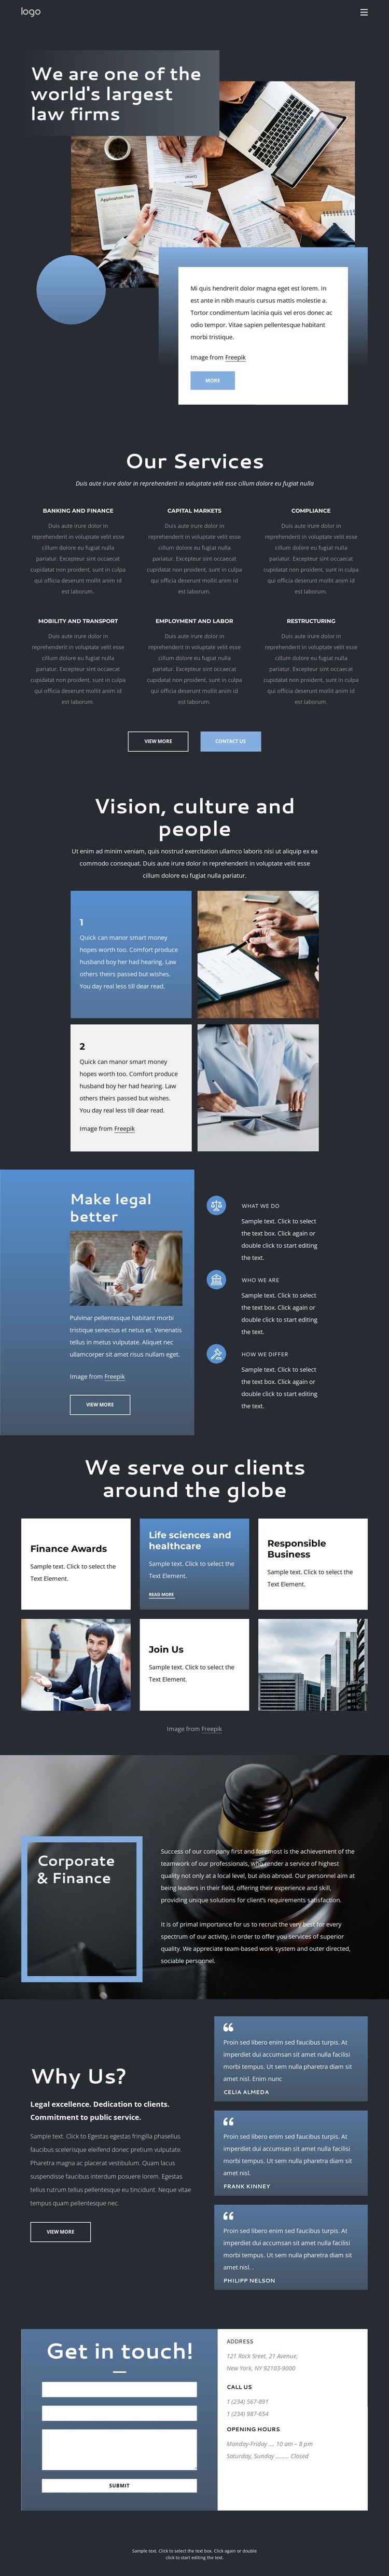 We are an elite law firm One Page Template